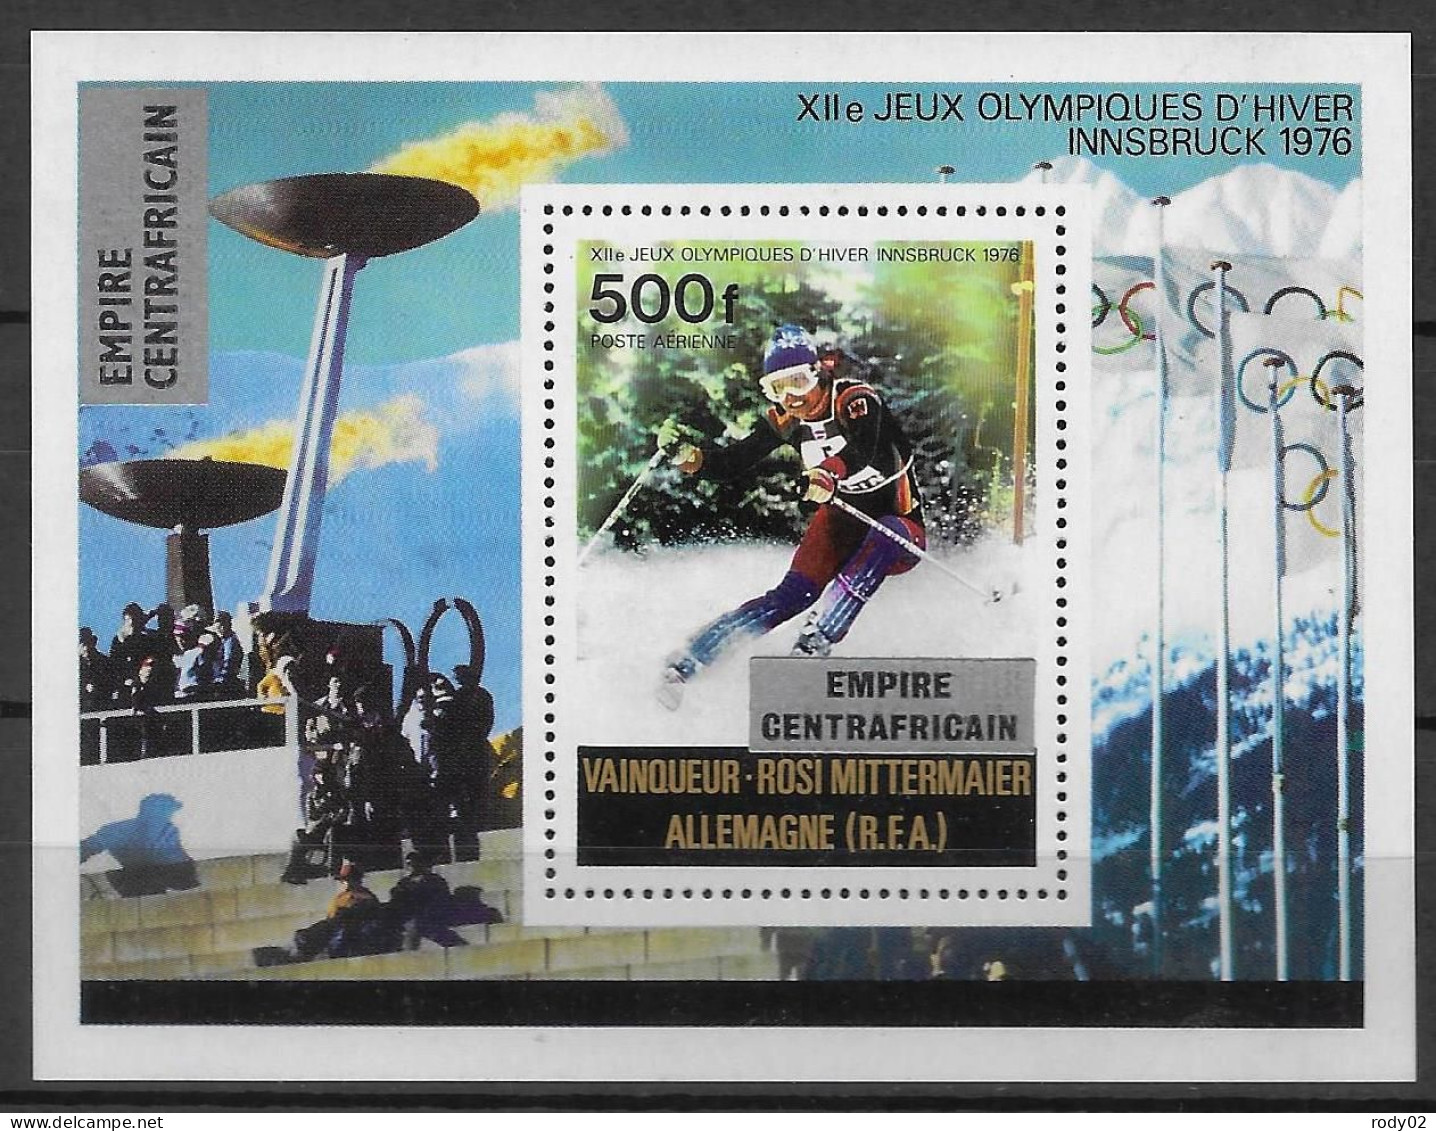 CENTRAFRIQUE - JEUX OLYMPIQUES D'HIVER A INNSBRUCK  - N° 297 ET 298, PA 175 A 177 ET BF 17 - NEUF** MNH - Inverno1976: Innsbruck